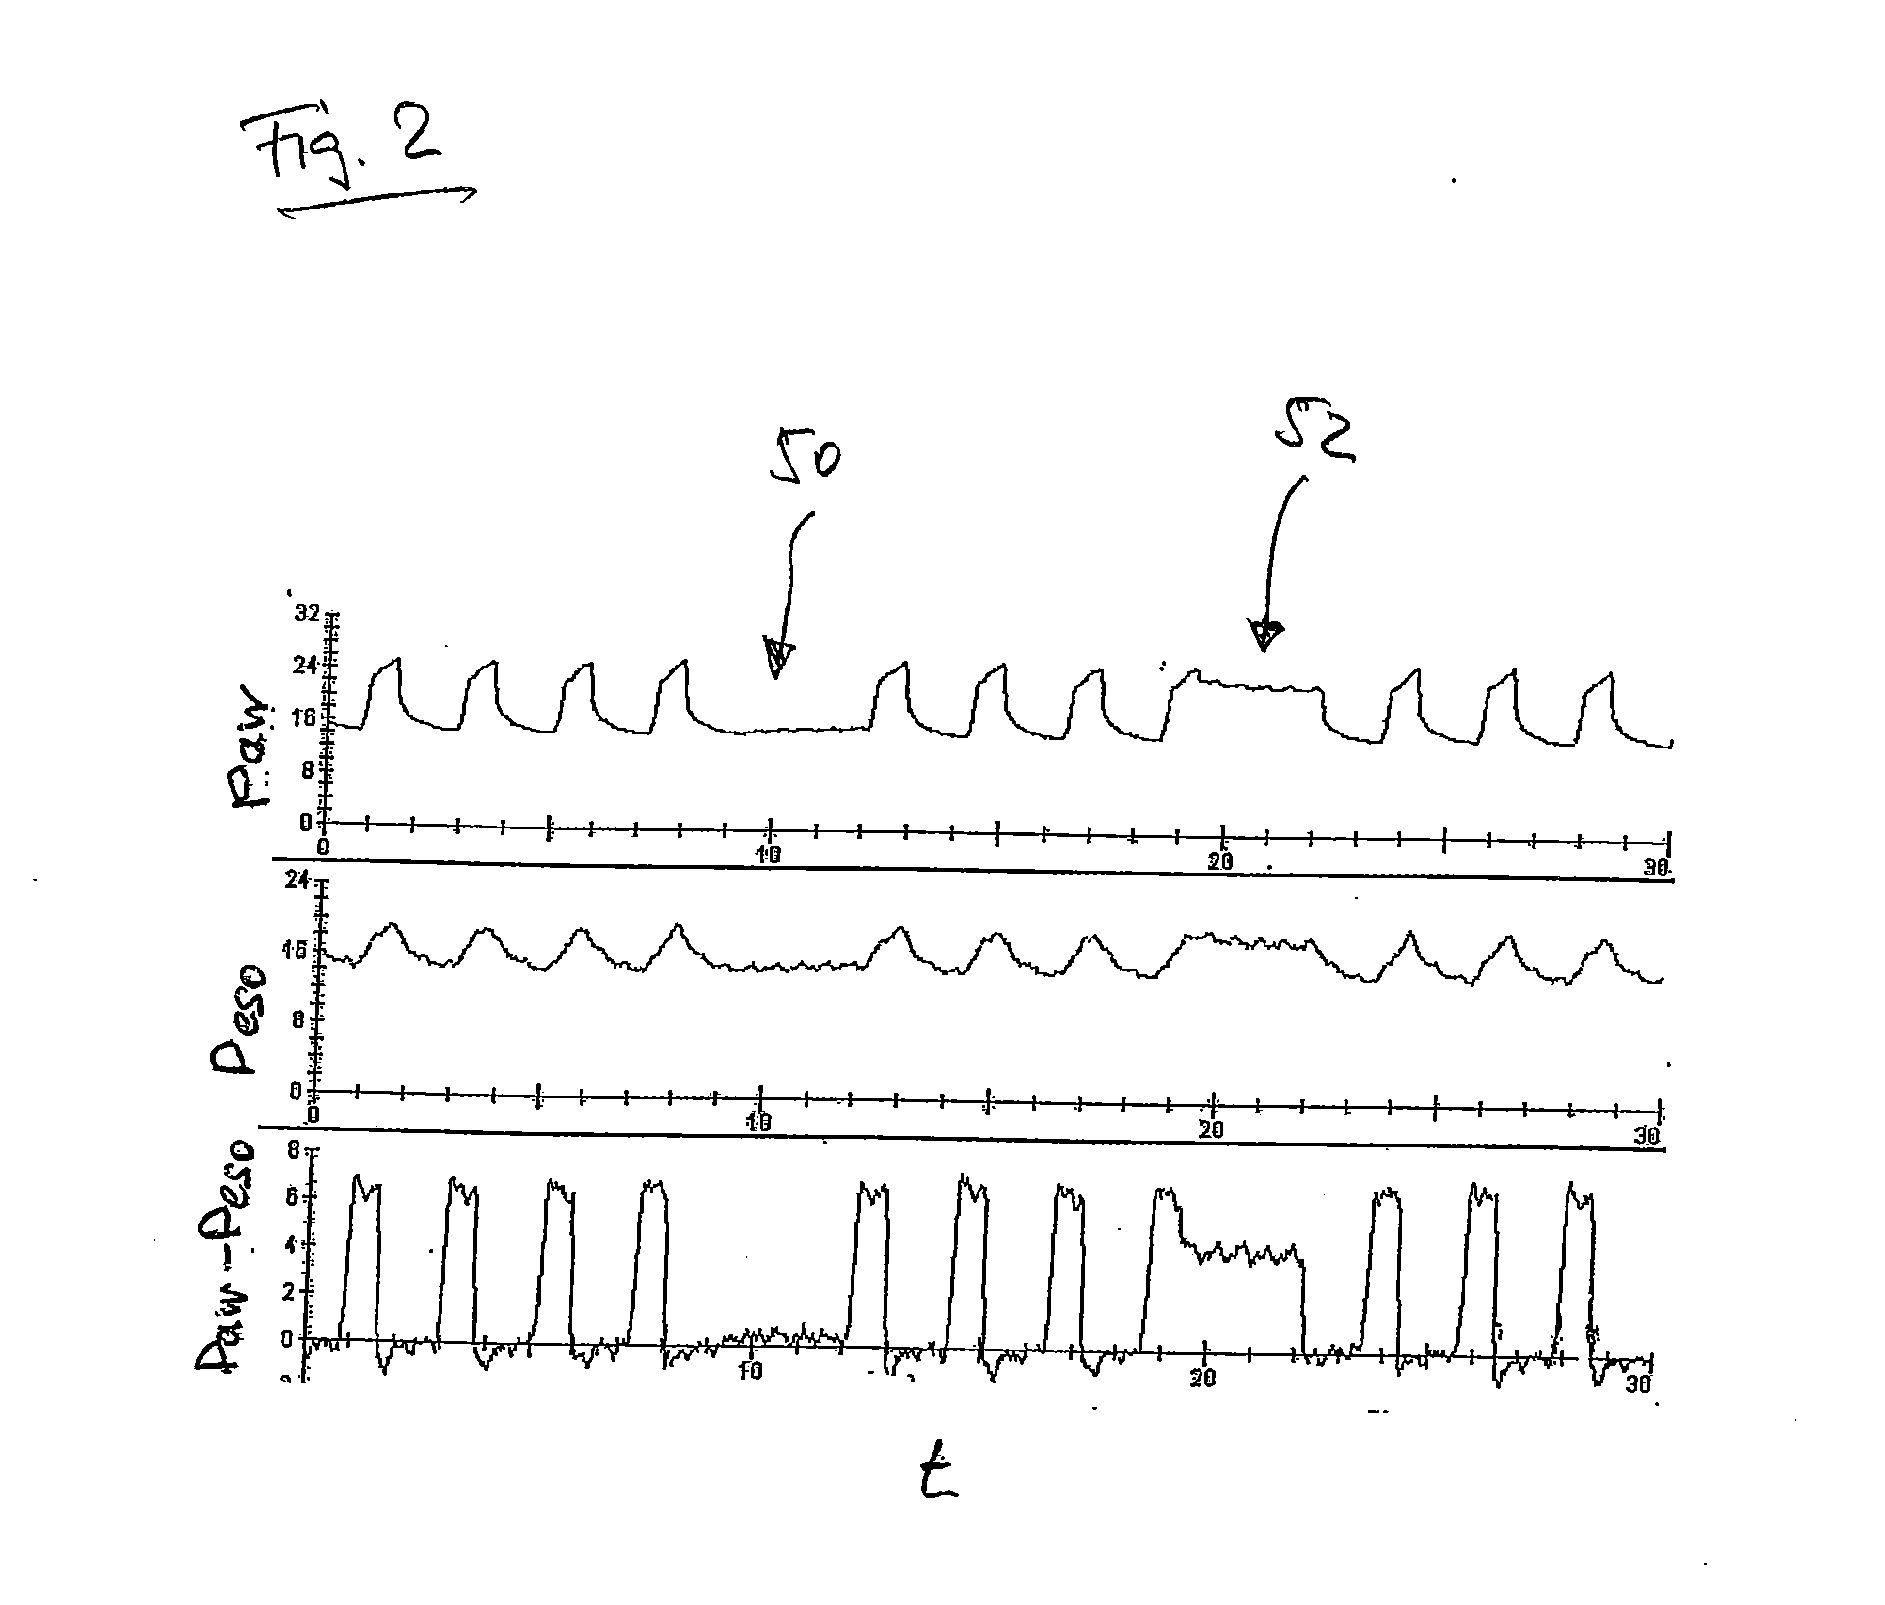 System for automated adjustment of a pressure set by a ventilation device